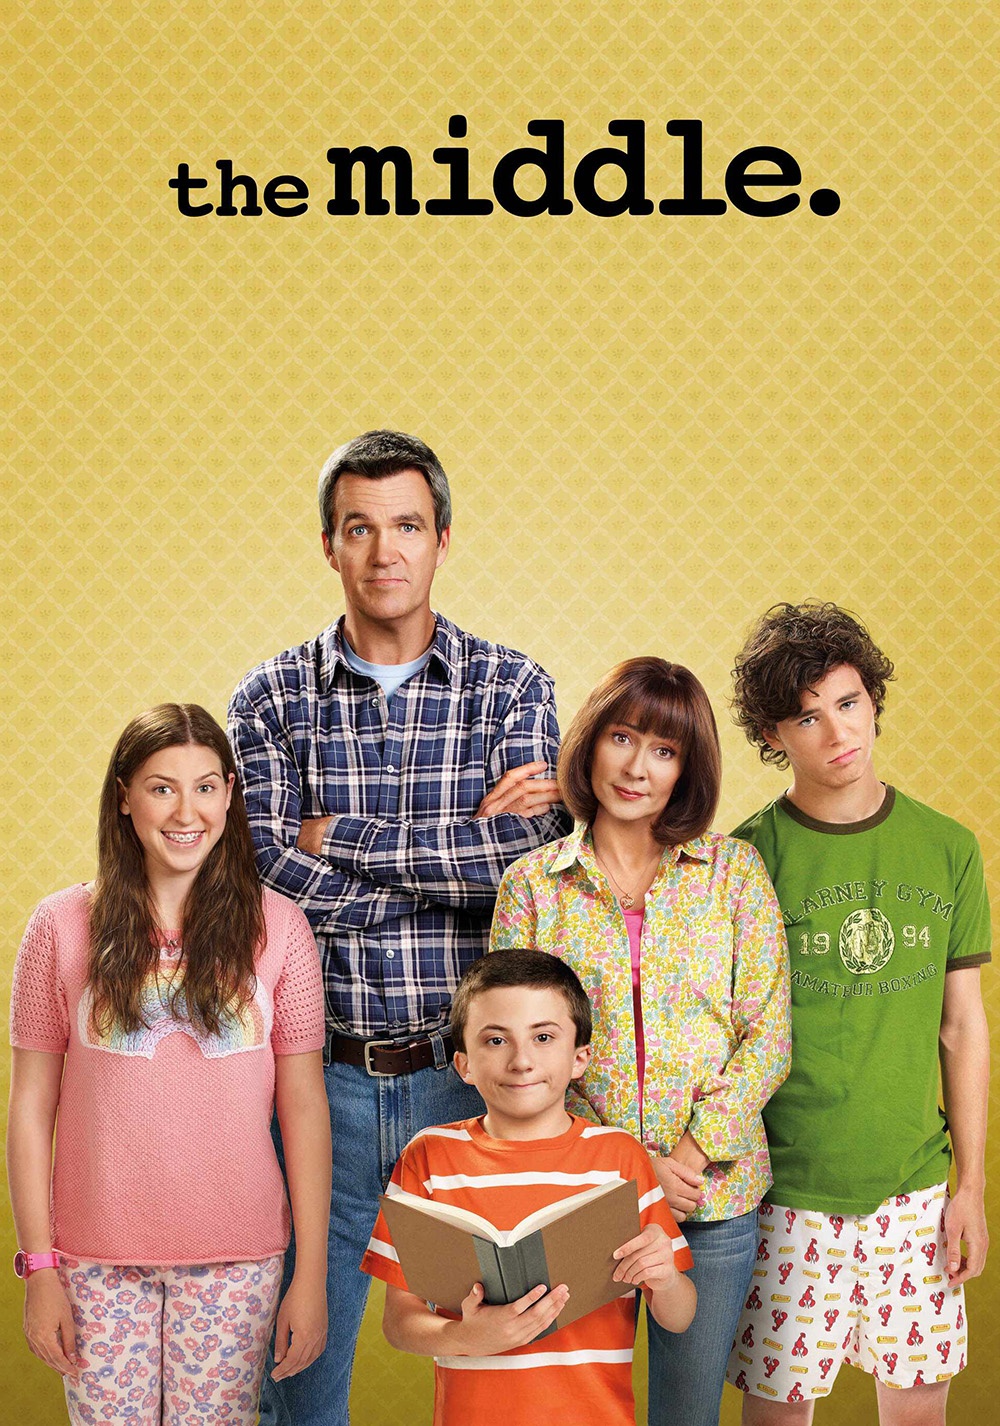 Why American Sitcom “The Middle” is One of the Best Family Comedies Ever 3